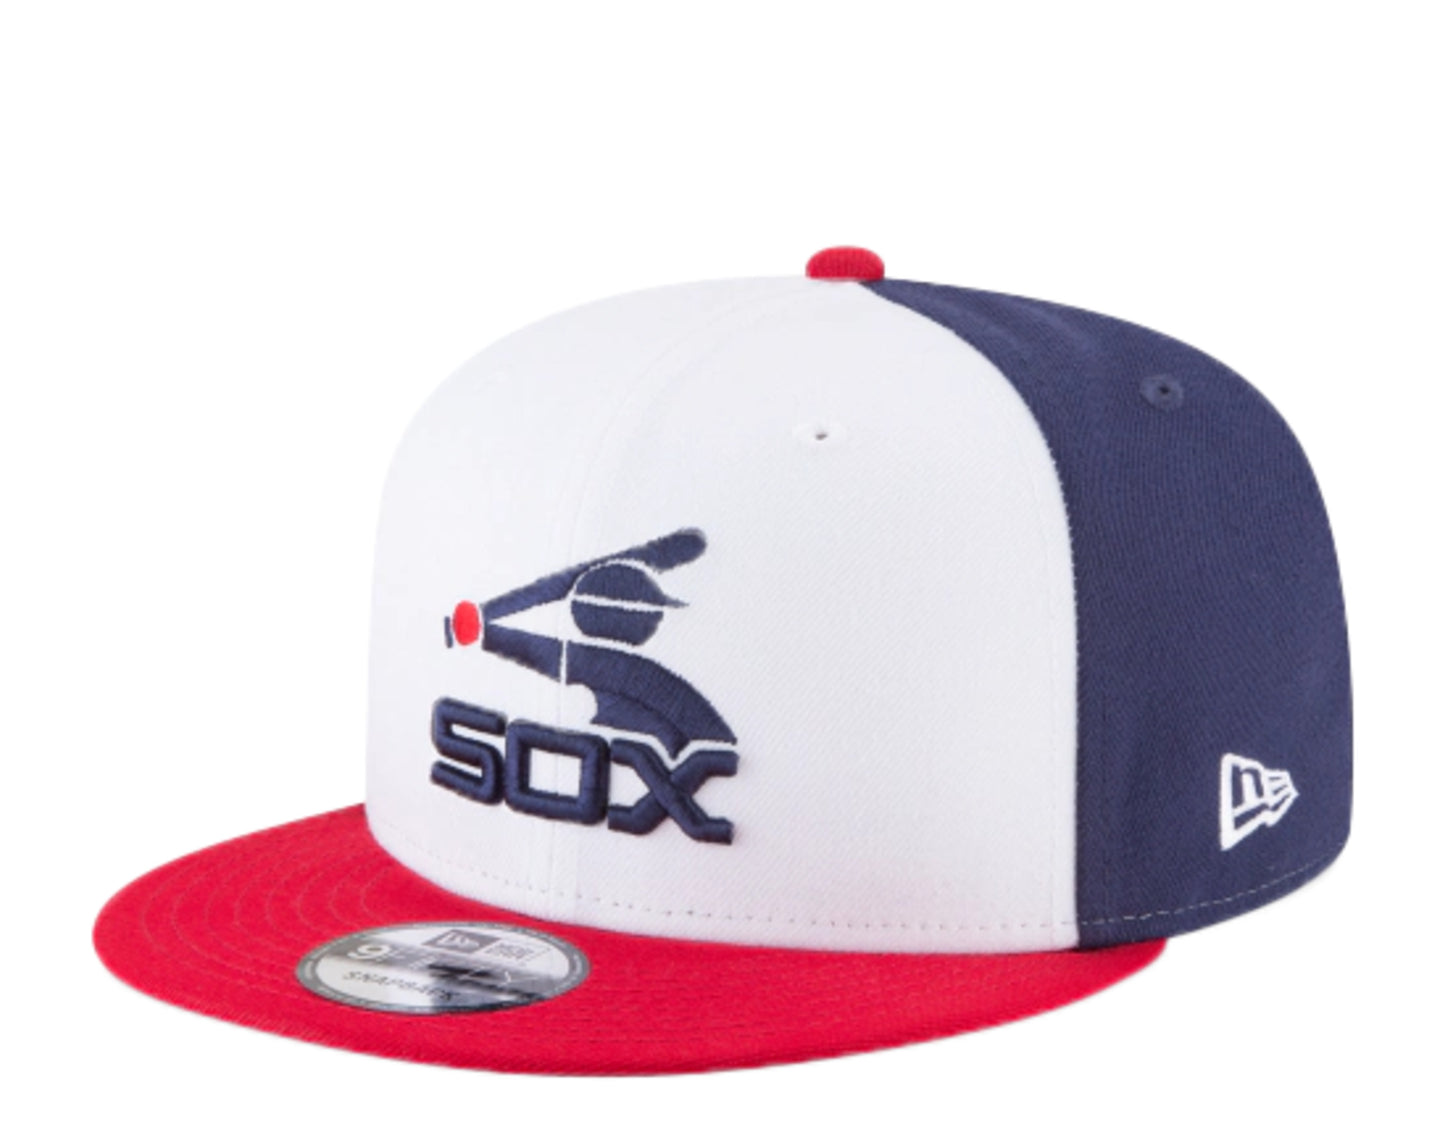 New Era 9Fifty MLB Chicago White Sox Cooperstown Basic Snapback Hat